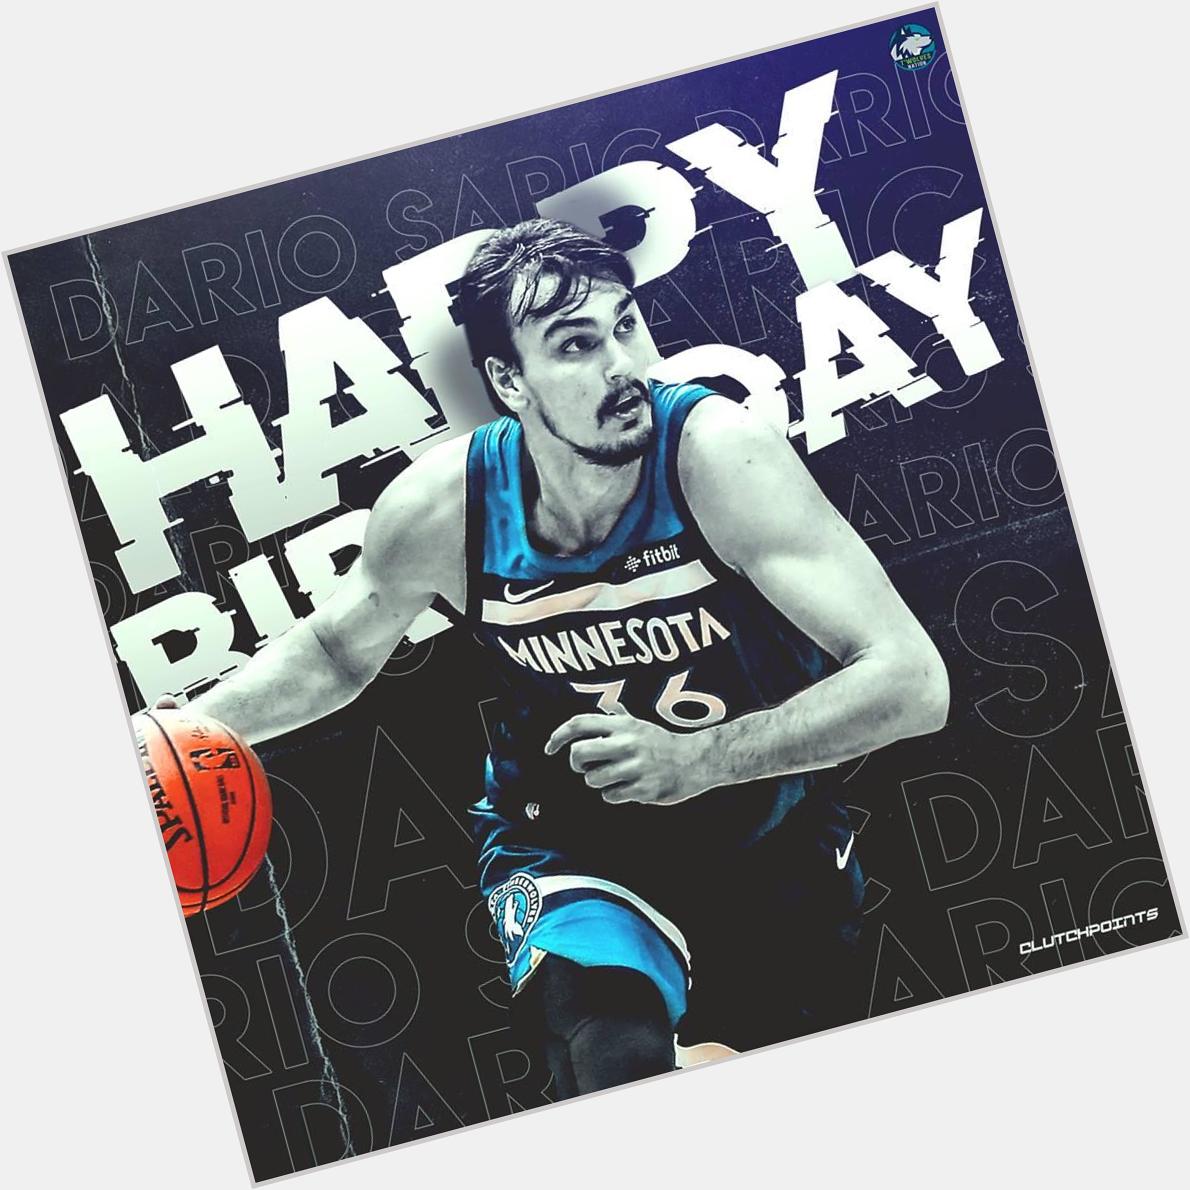 Join Wolves Nation in wishing Dario Saric a happy 25th birthday!  